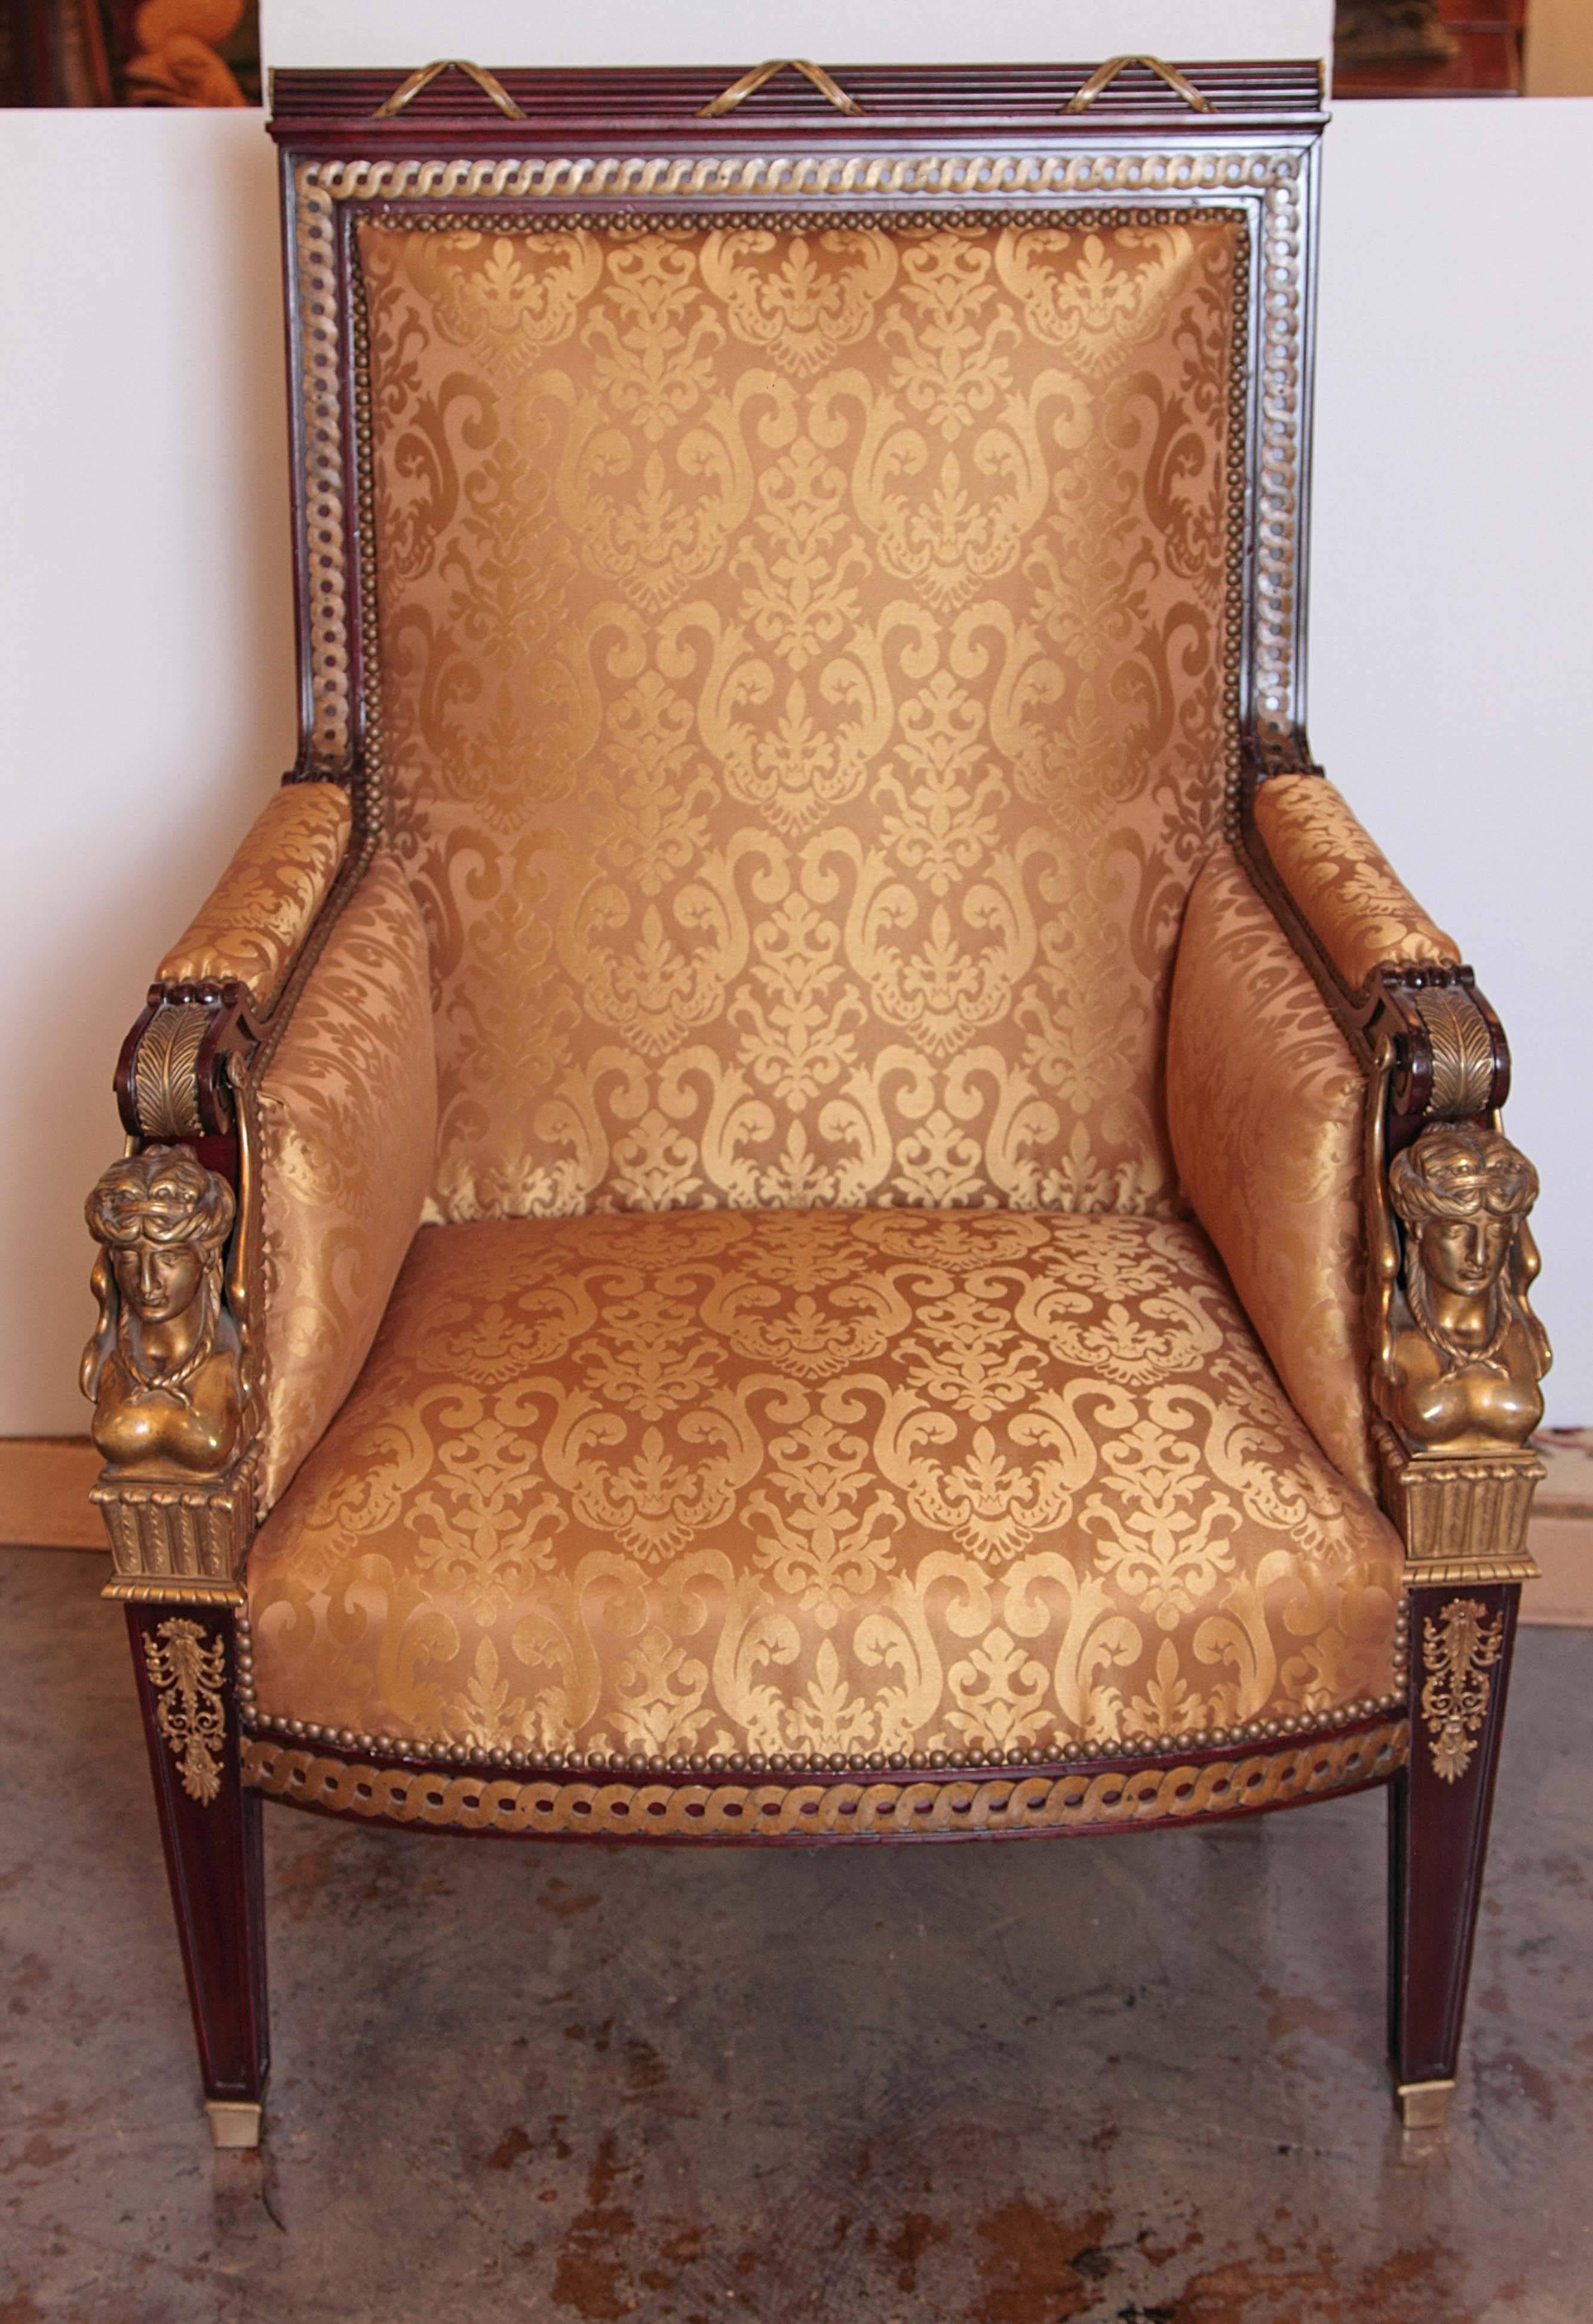 19th century Empire mahogany and gilt bronze mounted bergere. Oversized beautiful large-scale bergère with gilt bronze female heads on the arms.